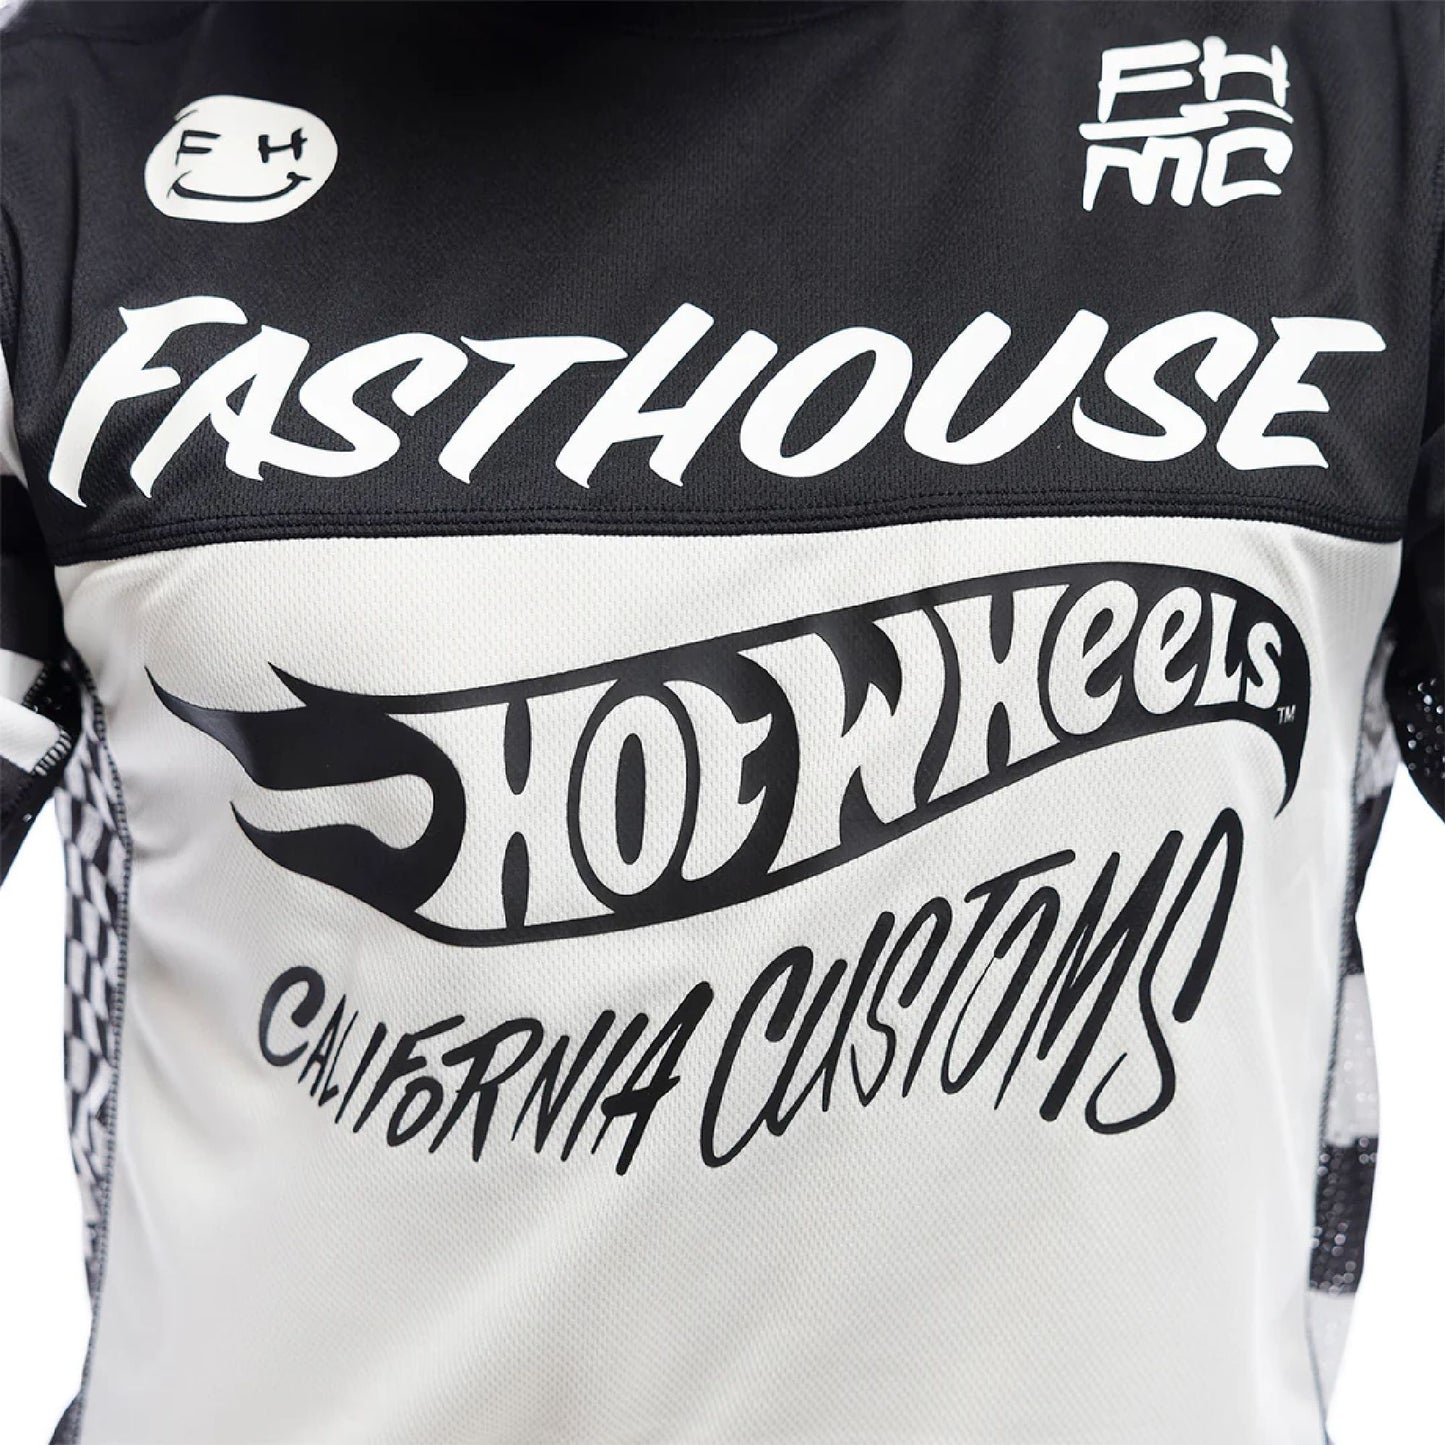 Fasthouse Youth Grindhouse Hot Wheels Jersey White Black Bike Jerseys